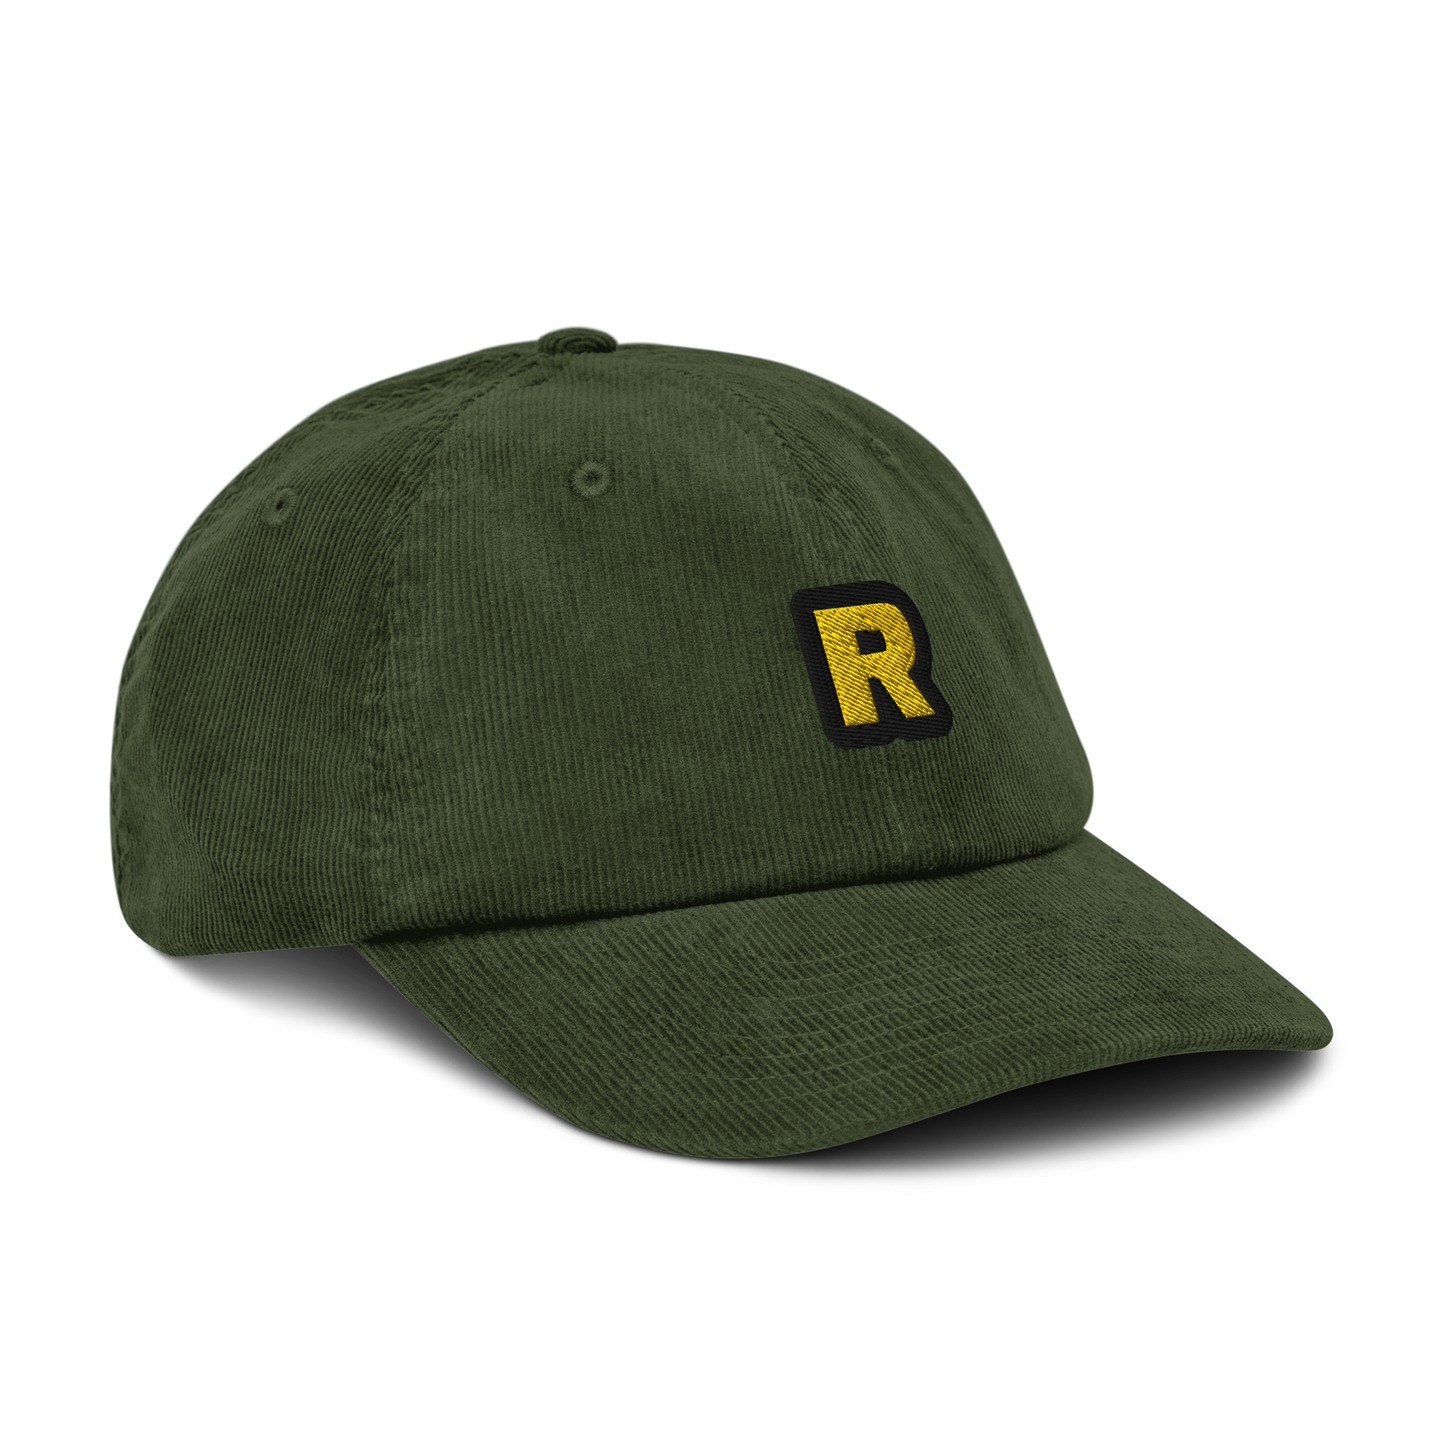 R - The letter collection - Corduroy hat